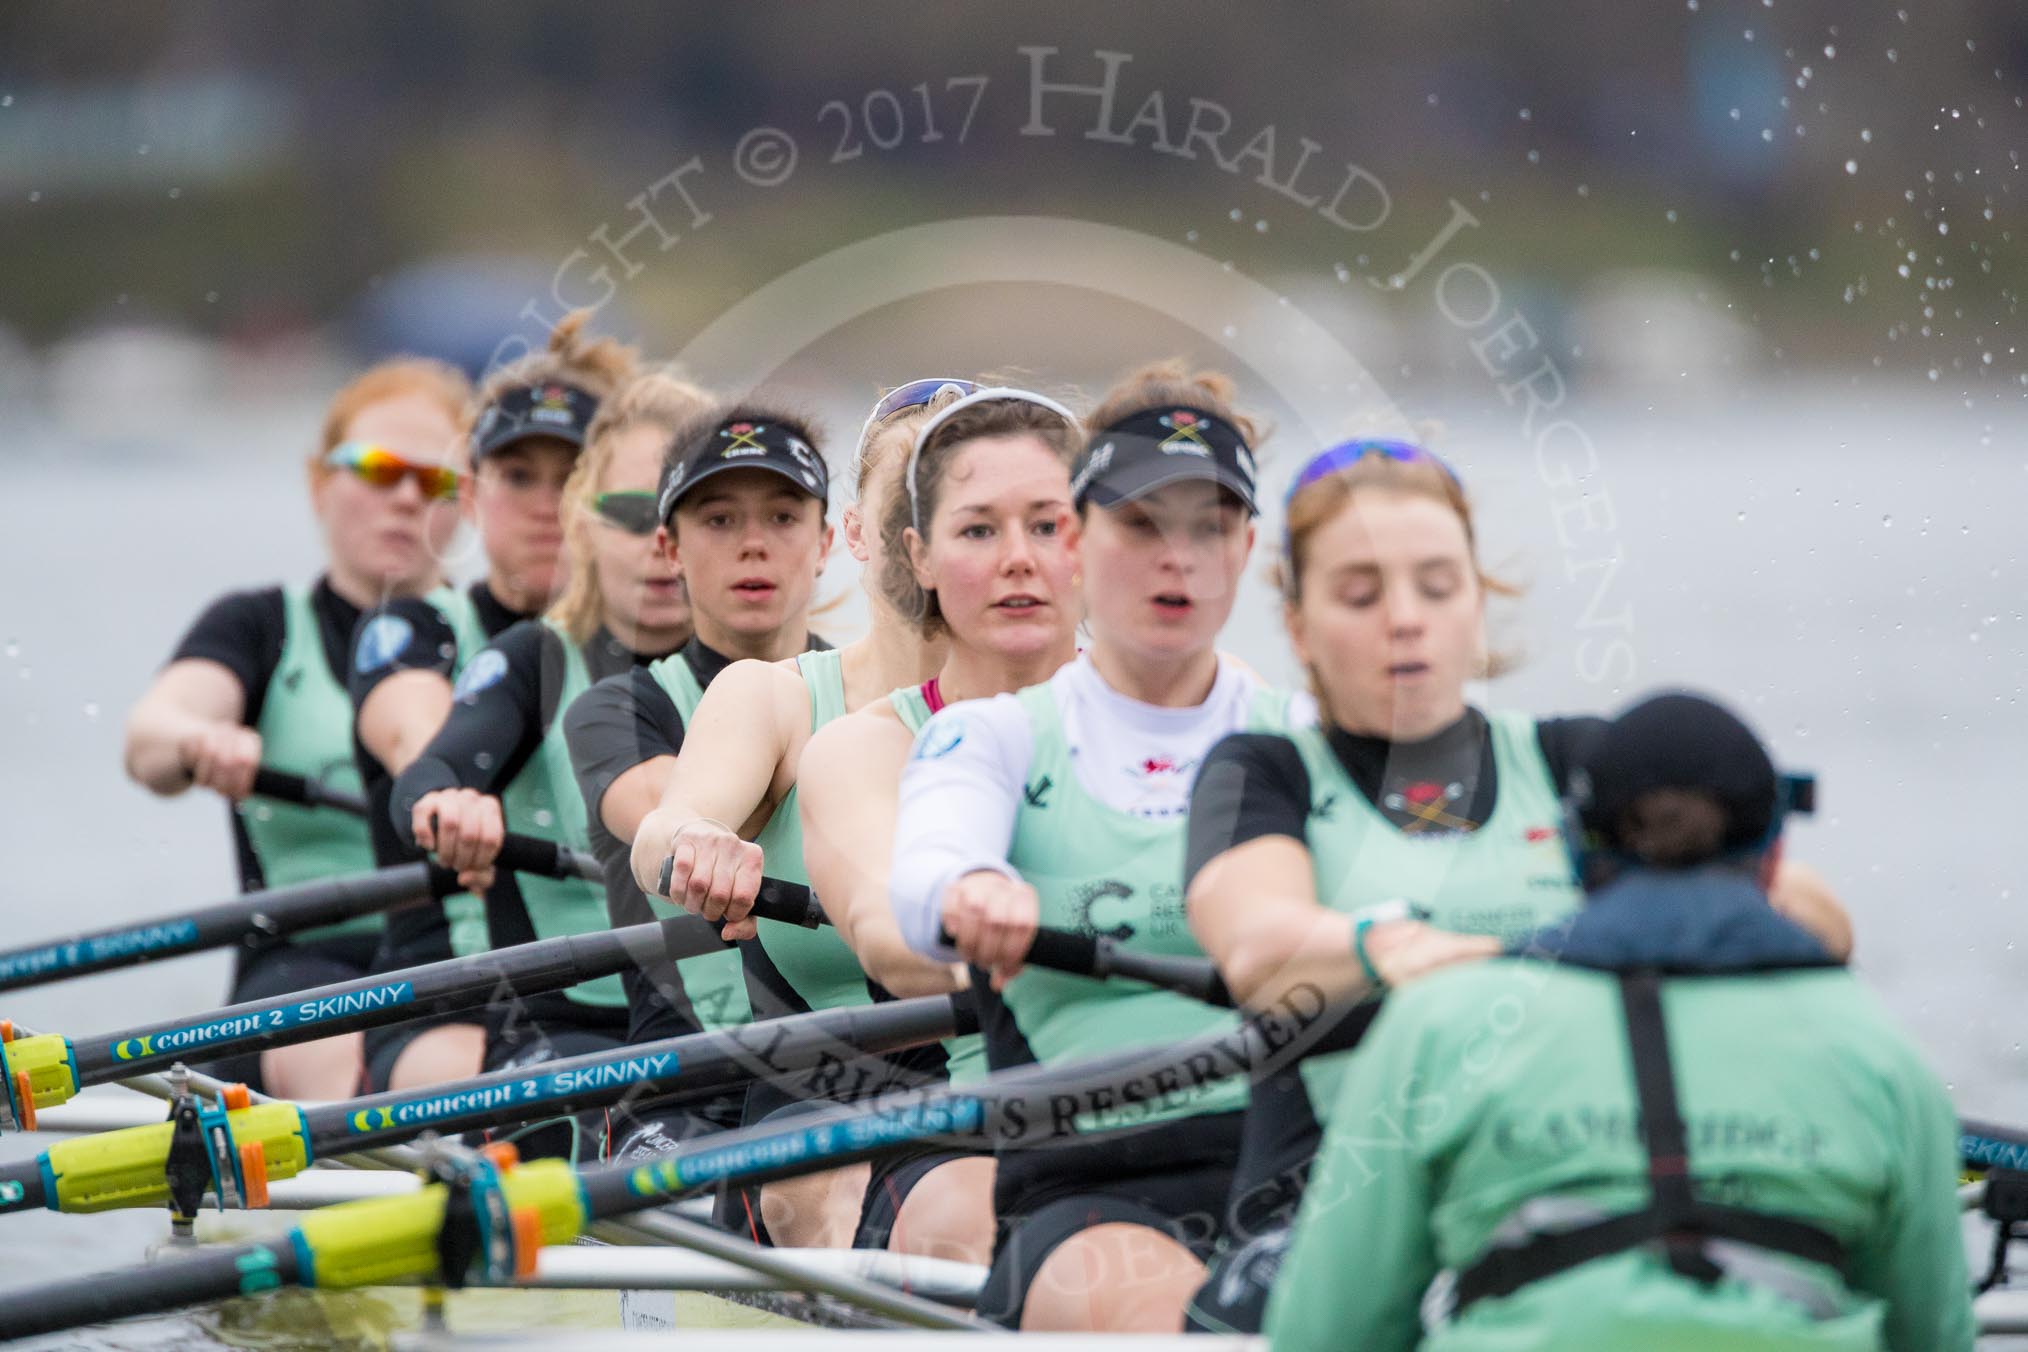 The Boat Race season 2017 - Women's Boat Race Fixture CUWBC vs Univerity of London: The CUWBC eight at the start of the race, cox - Matthew Holland, stroke - Alice White, 7 - Myriam Goudet, 6 - Melissa Wilson, 5 - Holy Hill, 4 - Imogen Grant, 3 - Ashton Brown, 2 - Kirsten Van Fosen, bow - Claire Lambe.
River Thames between Putney Bridge and Mortlake,
London SW15,

United Kingdom,
on 19 February 2017 at 16:01, image #62